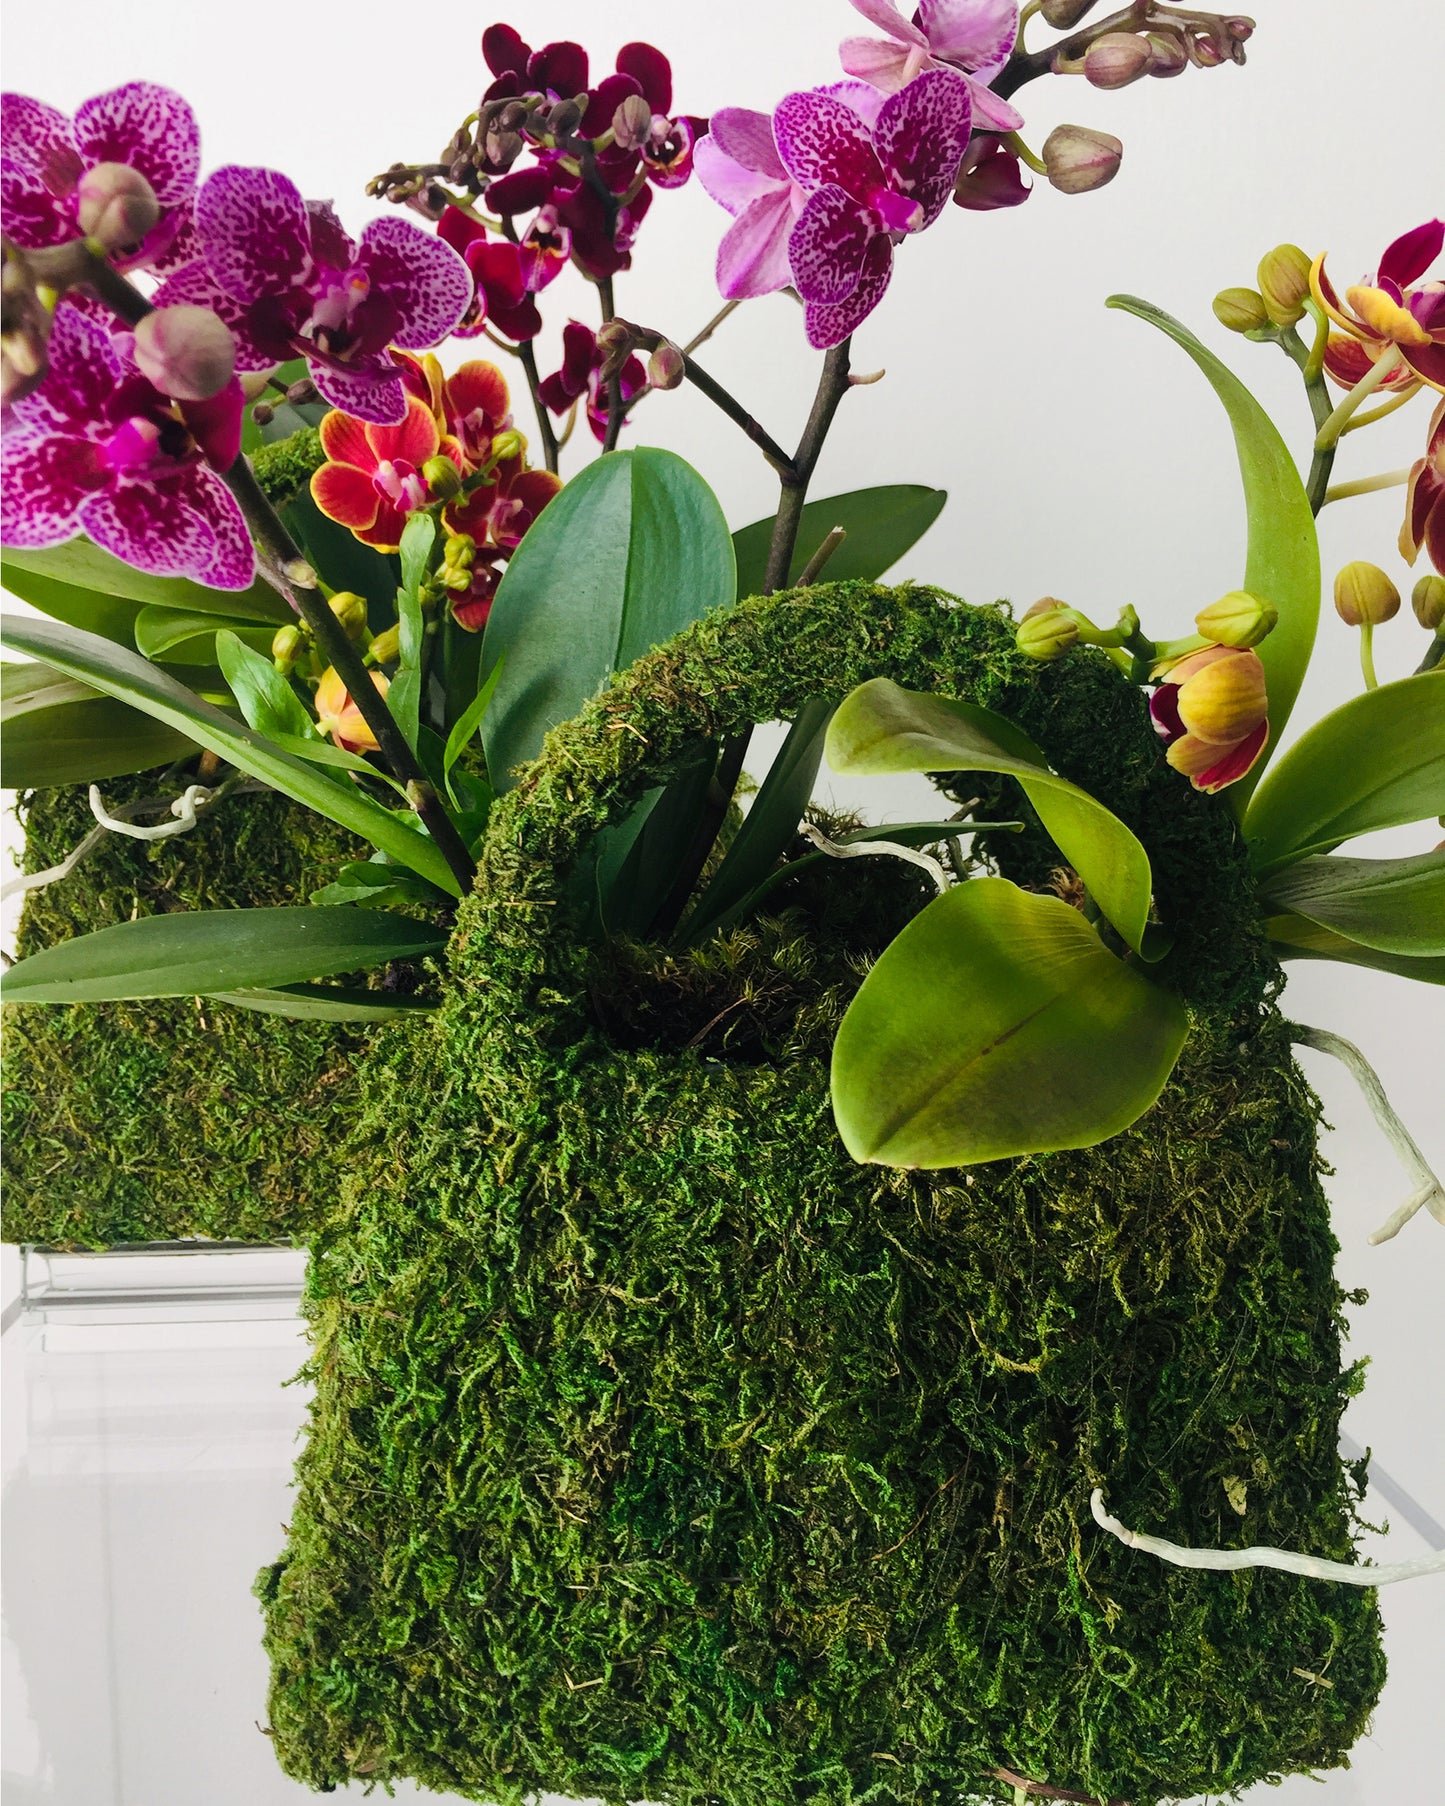 Purse shaped moss arranged with purple, red, and pink orchids inside.